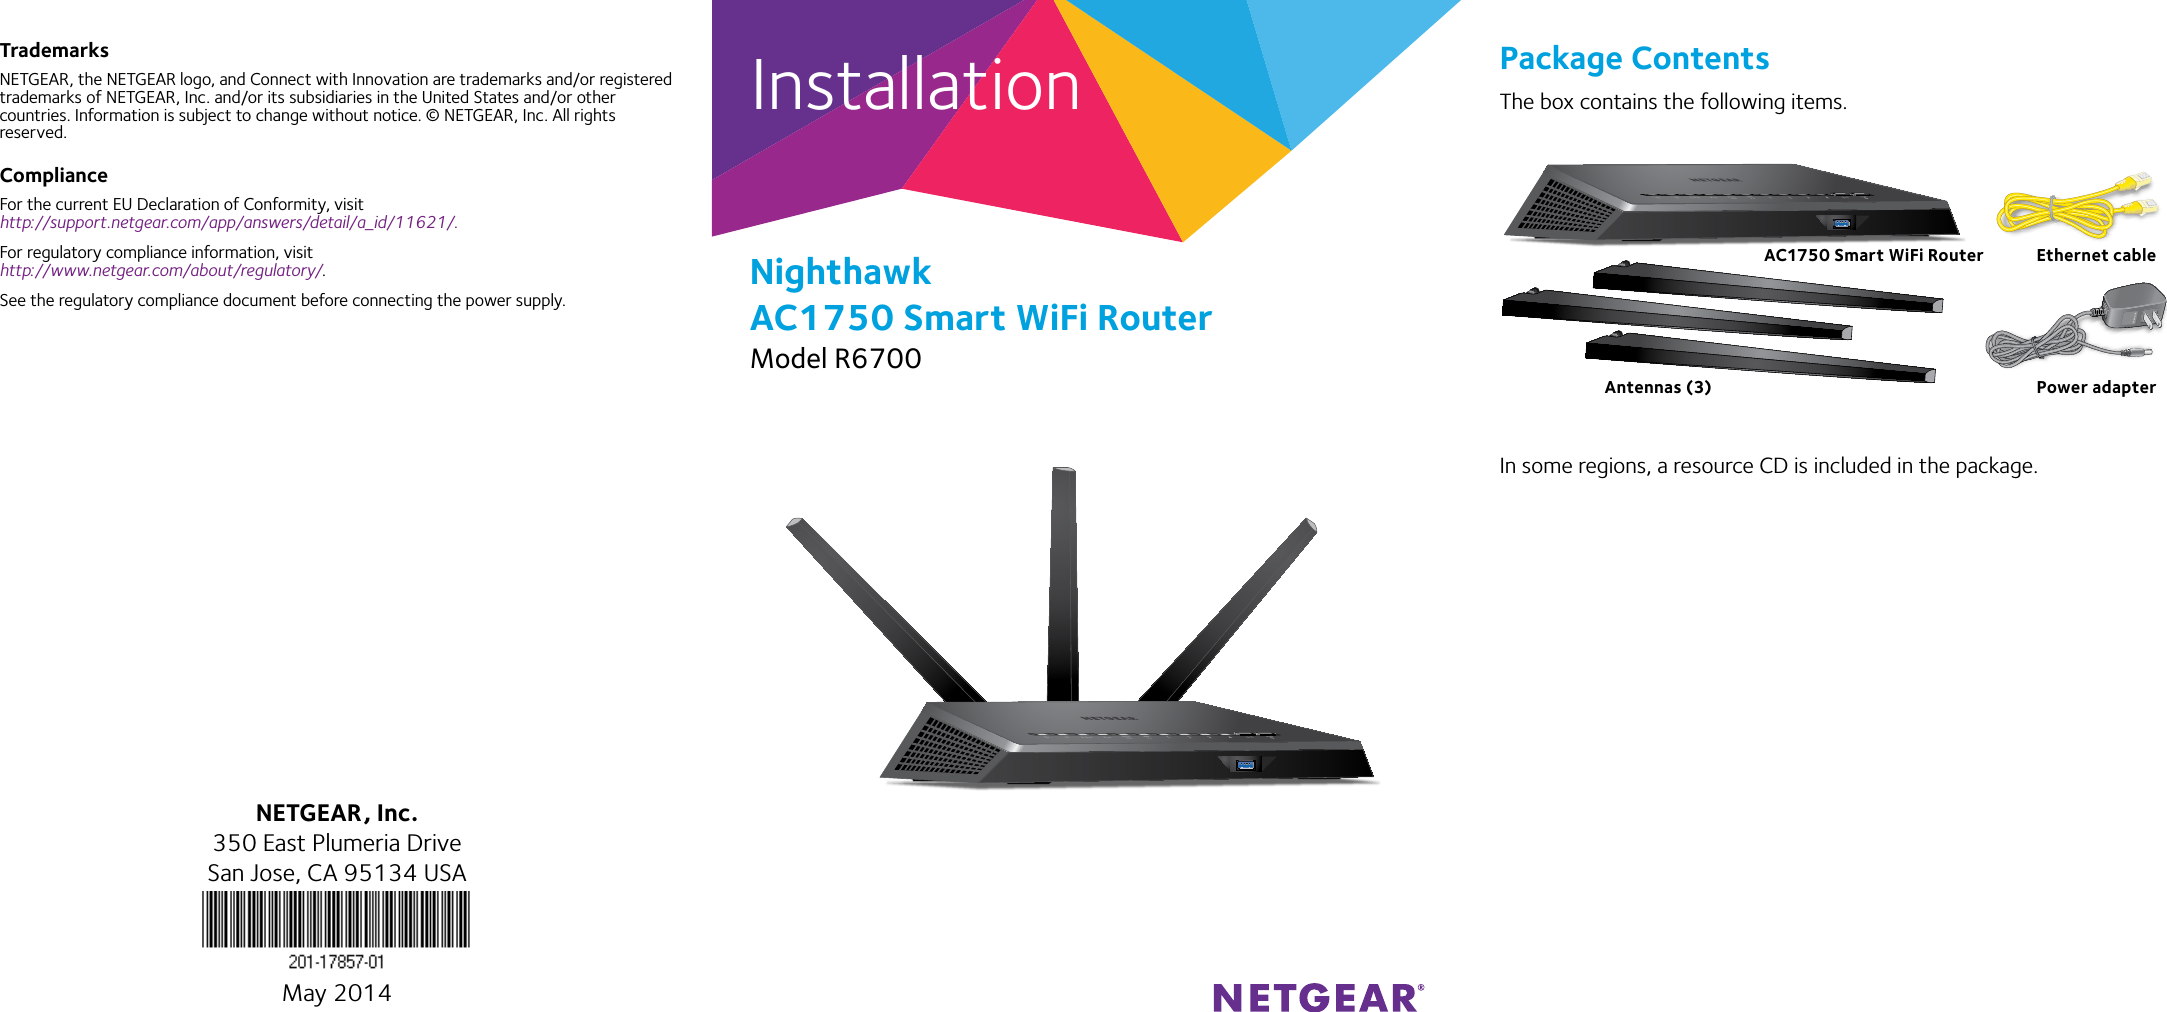 InstallationNighthawk AC1750 Smart WiFi RouterModel R6700TrademarksNETGEAR, the NETGEAR logo, and Connect with Innovation are trademarks and/or registered trademarks of NETGEAR, Inc. and/or its subsidiaries in the United States and/or other countries. Information is subject to change without notice. © NETGEAR, Inc. All rights reserved.ComplianceFor the current EU Declaration of Conformity, visit  http://support.netgear.com/app/answers/detail/a_id/11621/. For regulatory compliance information, visit http://www.netgear.com/about/regulatory/.See the regulatory compliance document before connecting the power supply.Package ContentsThe box contains the following items.In some regions, a resource CD is included in the package.NETGEAR, Inc.350 East Plumeria DriveSan Jose, CA 95134 USAMay 2014AC1750 Smart WiFi Router Ethernet cablePower adapterAntennas (3)